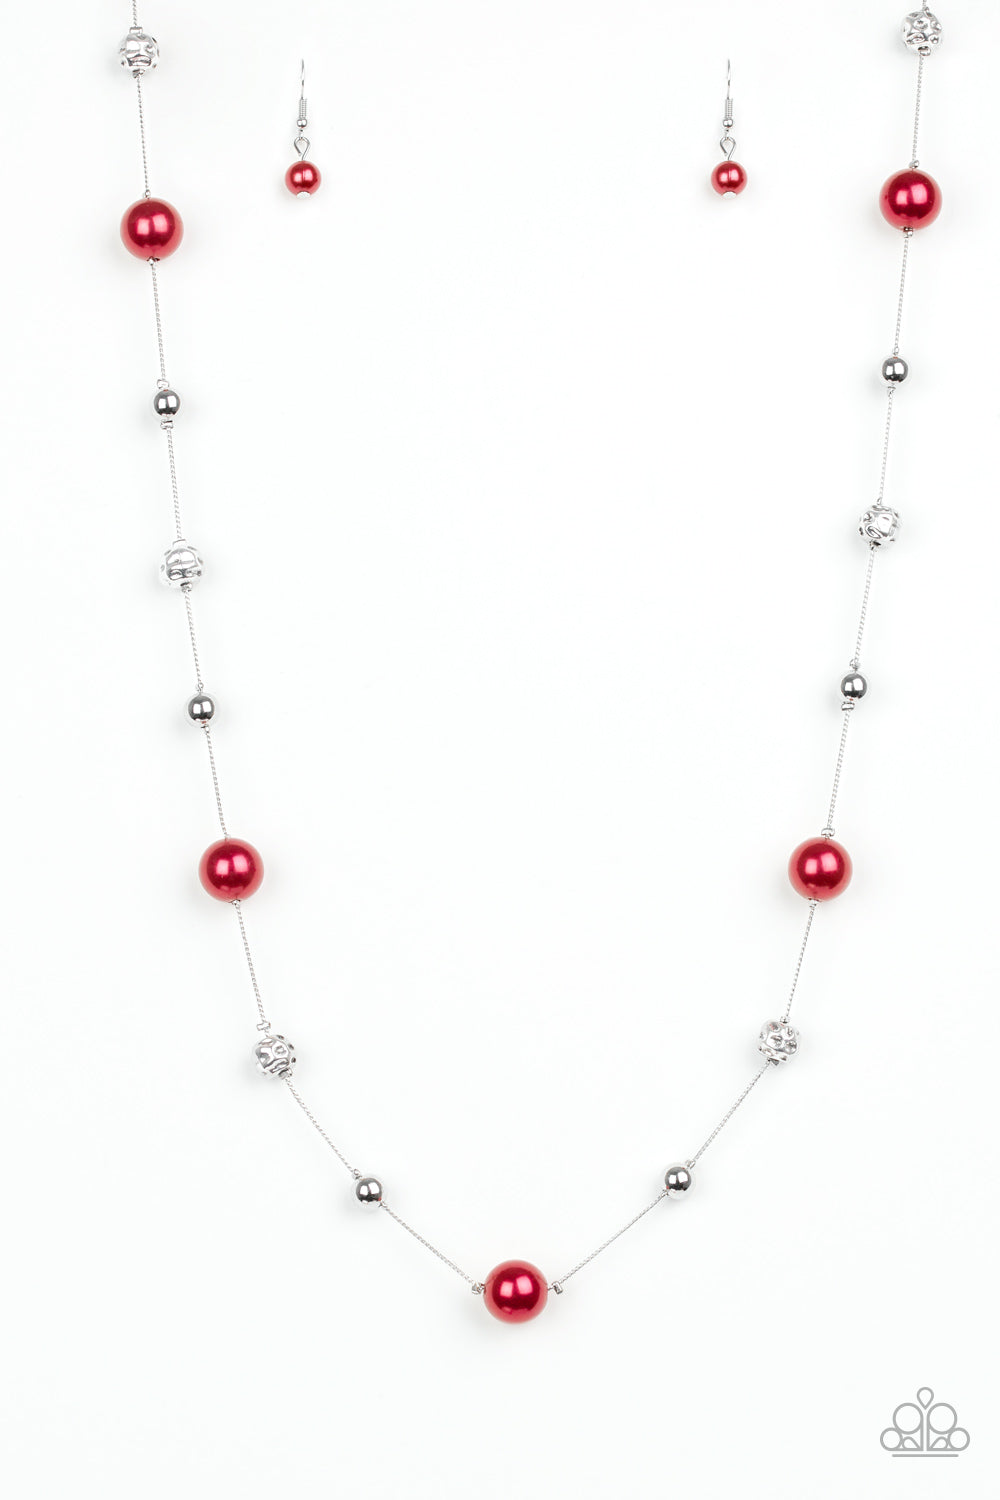 Eloquently Eloquent - red - Paparazzi necklace